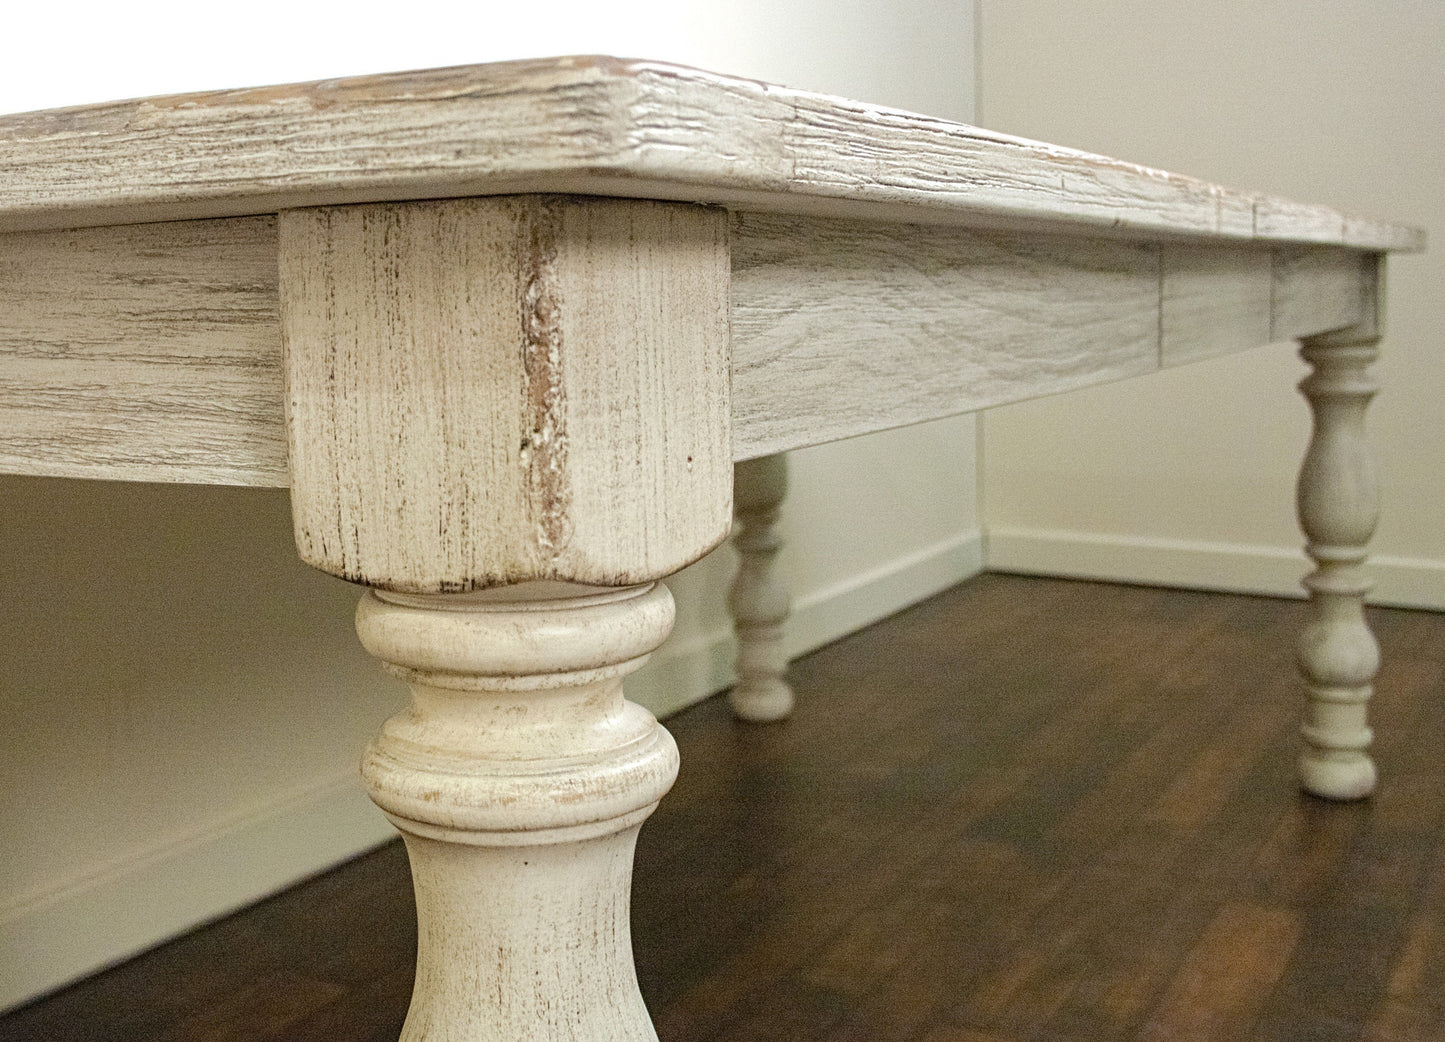 Trani Weathered Worn White Wood Dining Table with Extension Leaf